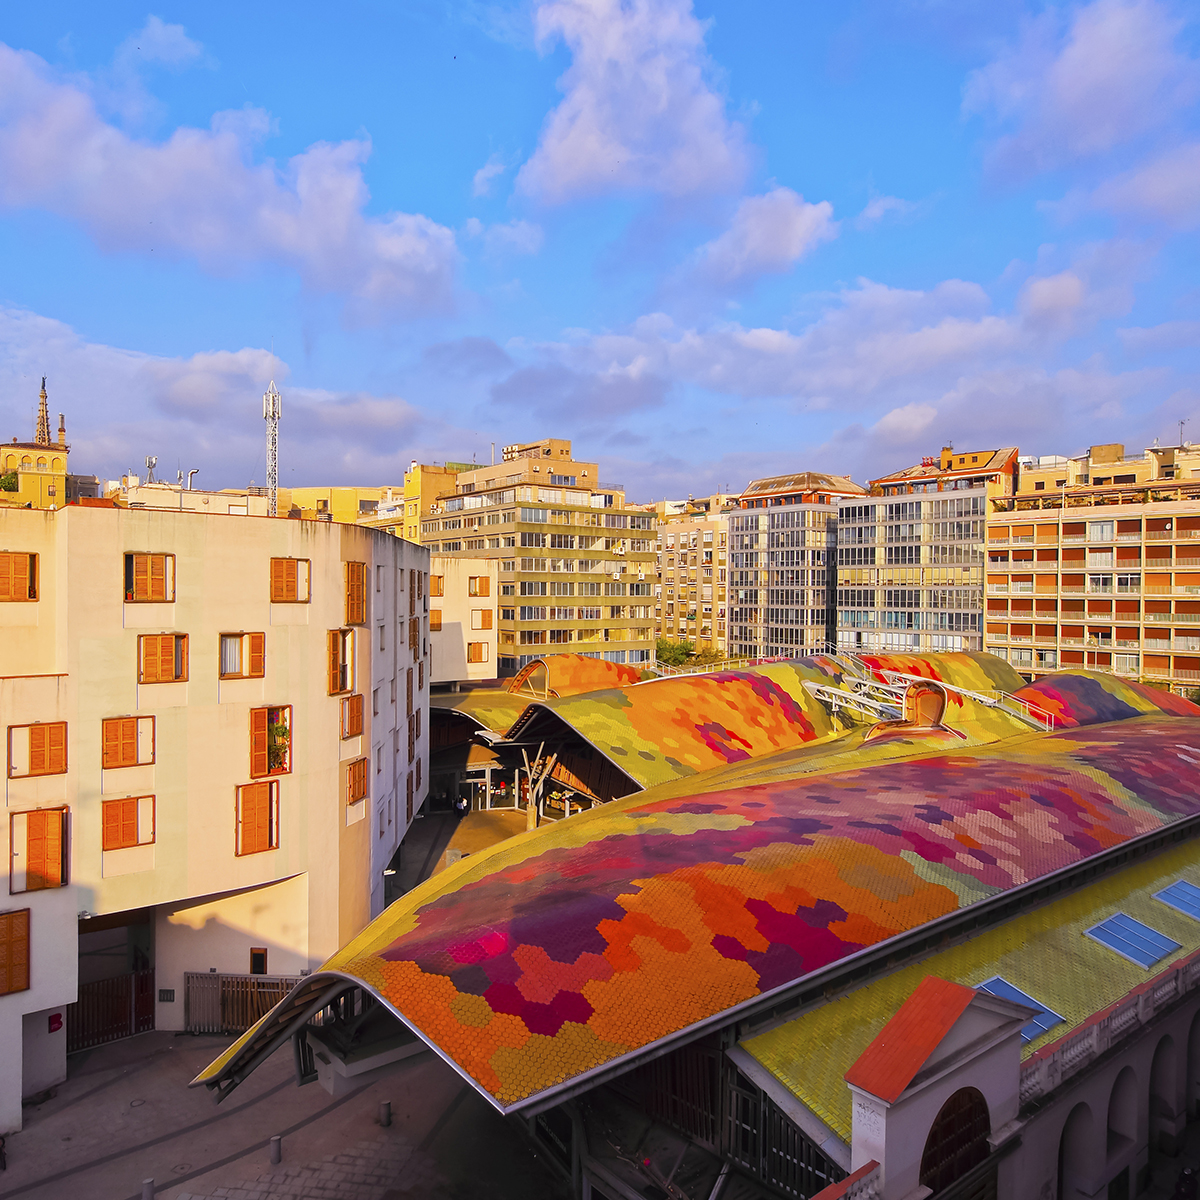 In discovery of Barcelona’s gastronomic markets